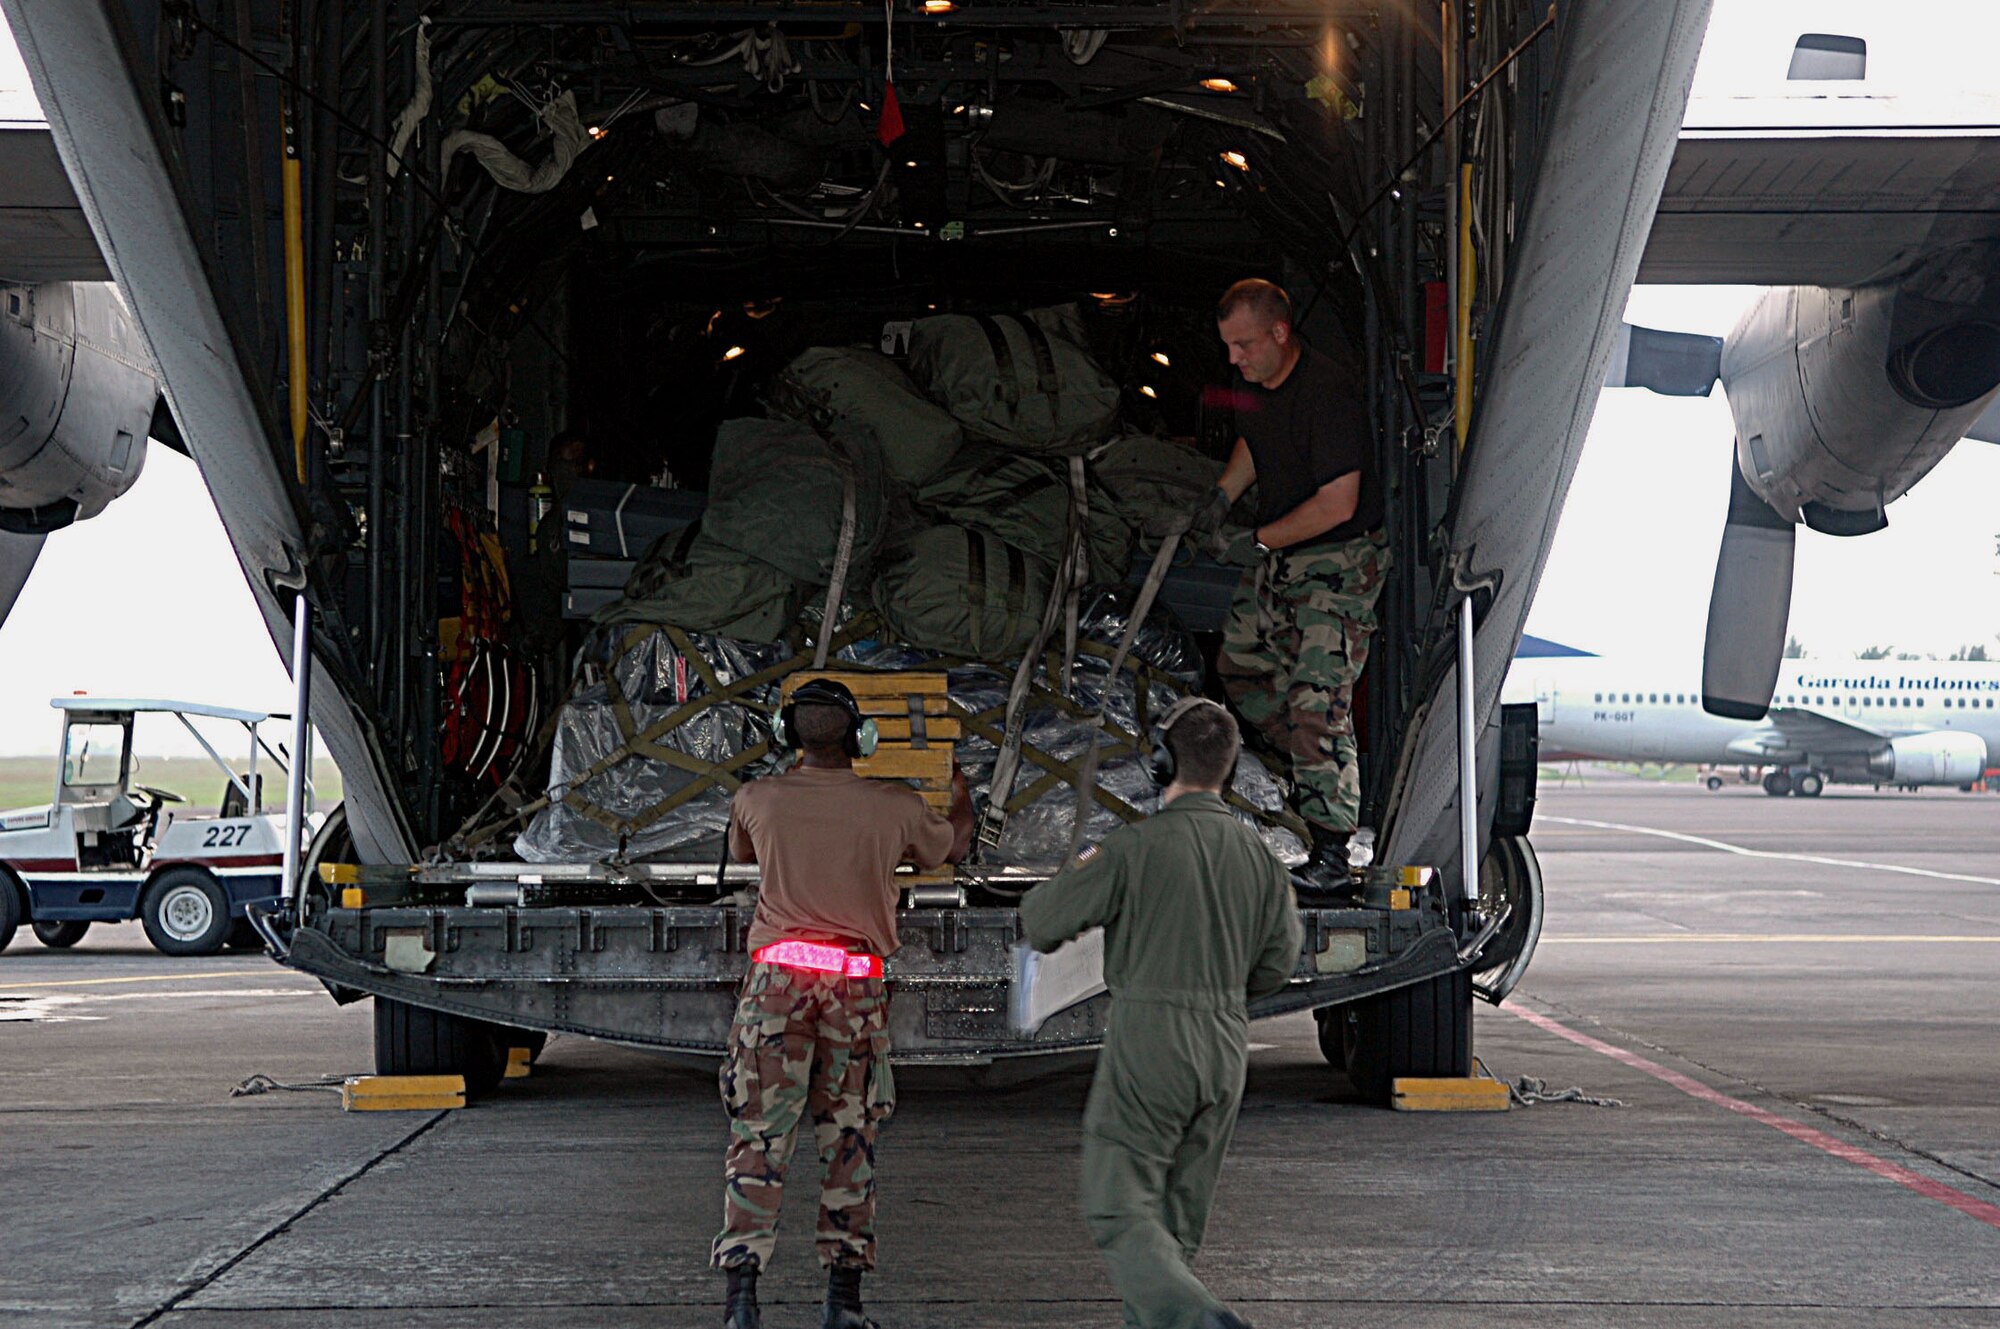 Airmen from the 36th Airlift Squadron and Combat Mobility Element at Yokota Air Base, Japan, unload supplies and equipment at Yogyakarta, Indonesia, on Thursday, June 1, 2006. The C-130 Hercules mission brought humanitarian relief aid to Indonesia, after an earthquake claimed the lives of more than 6,200 people and injured thousands more. (U.S. Air Force photo/Airman 1st Class Javier Cruz Jr.) 
